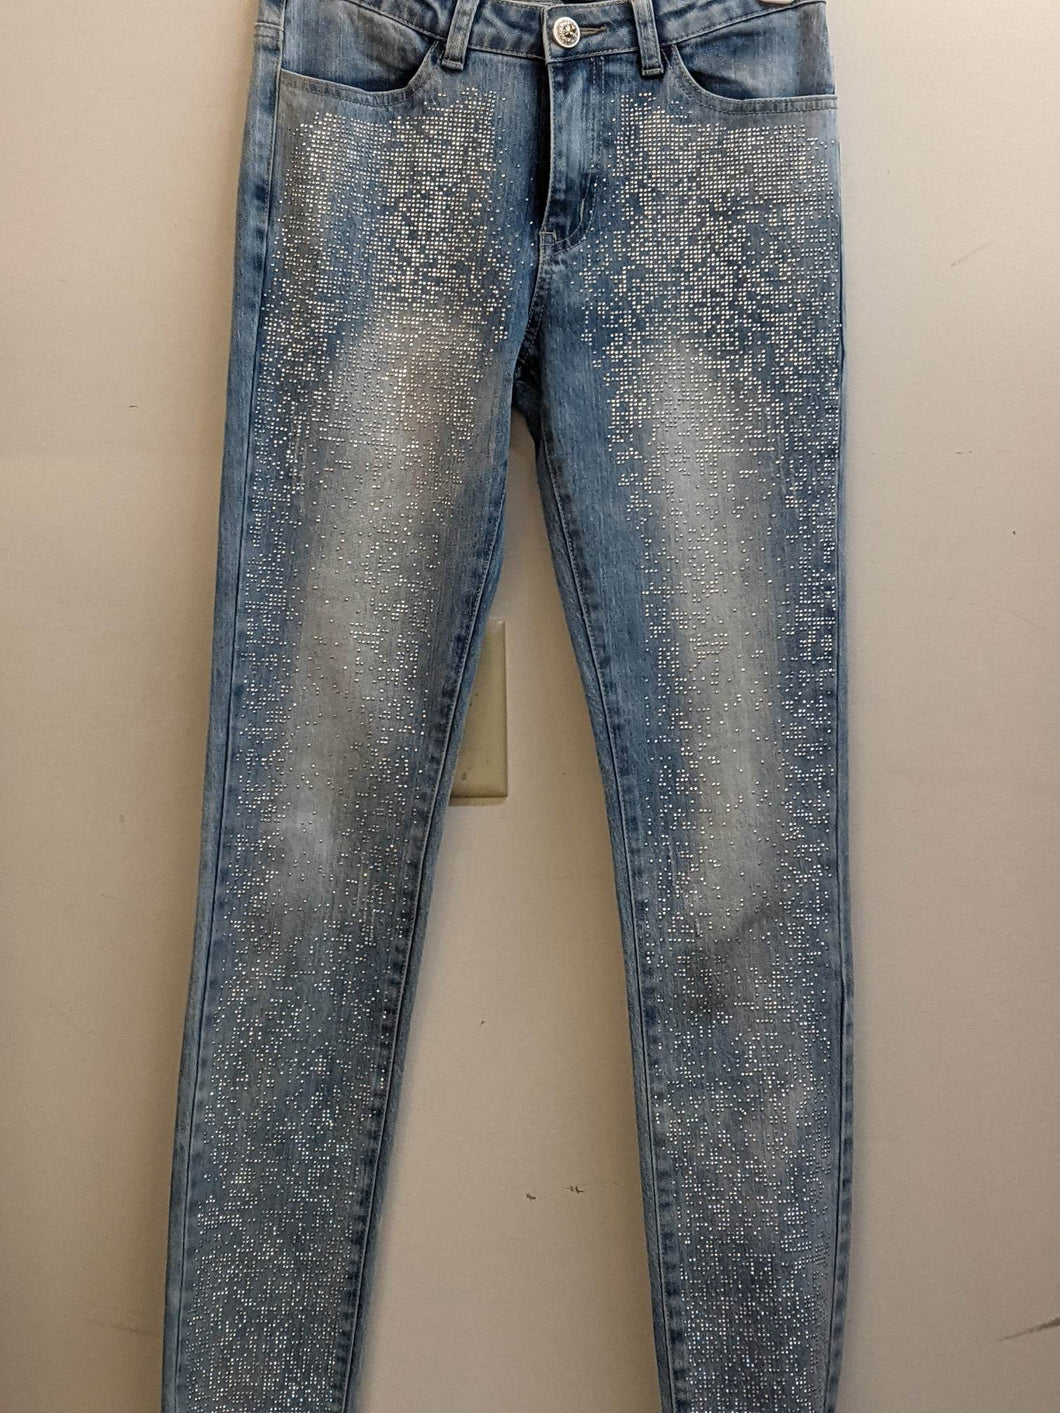 Cartise jeans